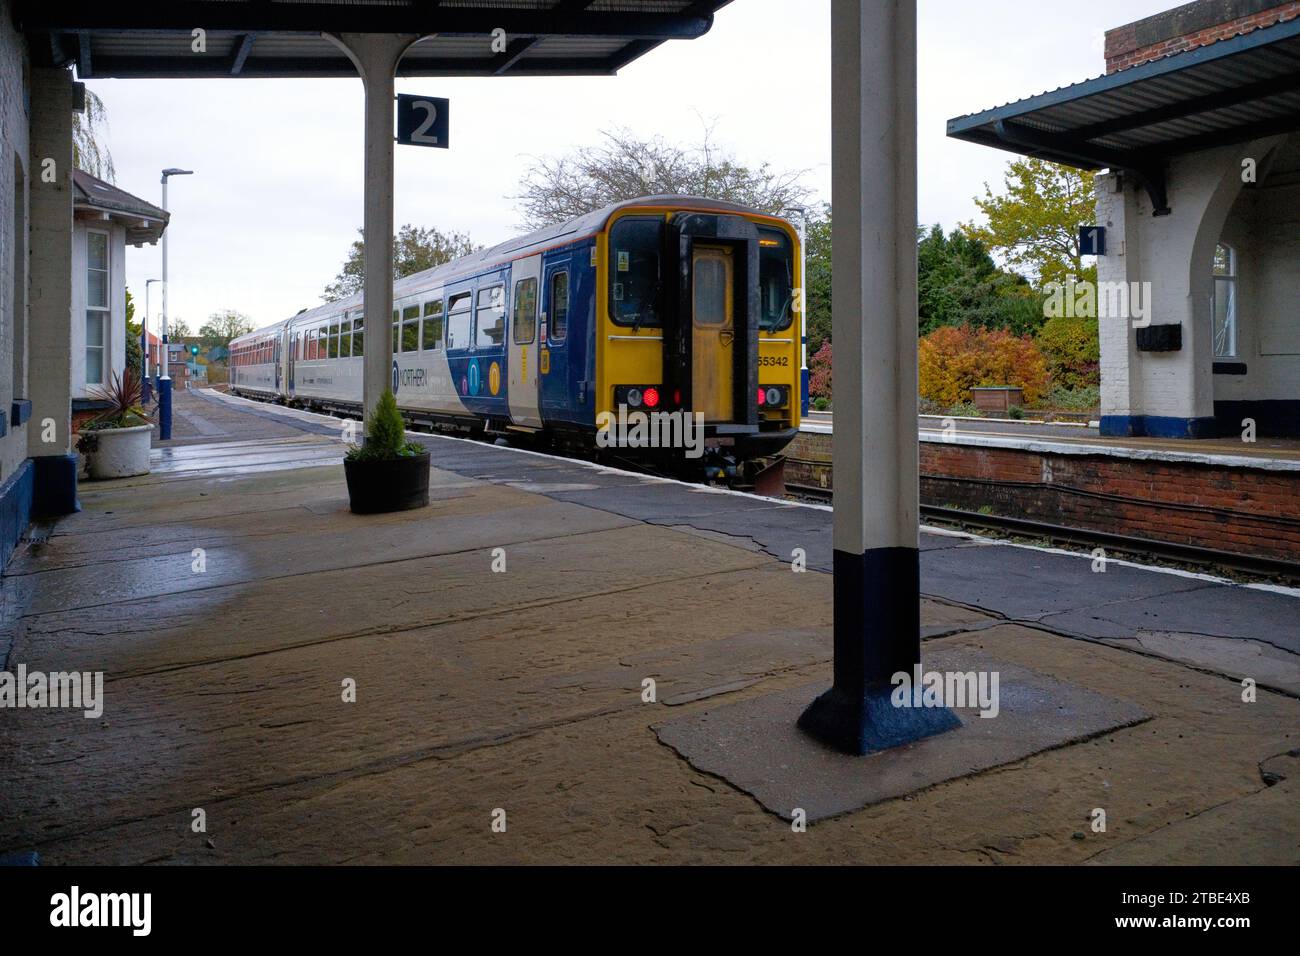 Northern Trains 55342 leaving platform two at Driffield station on its way to Bridlington Stock Photo